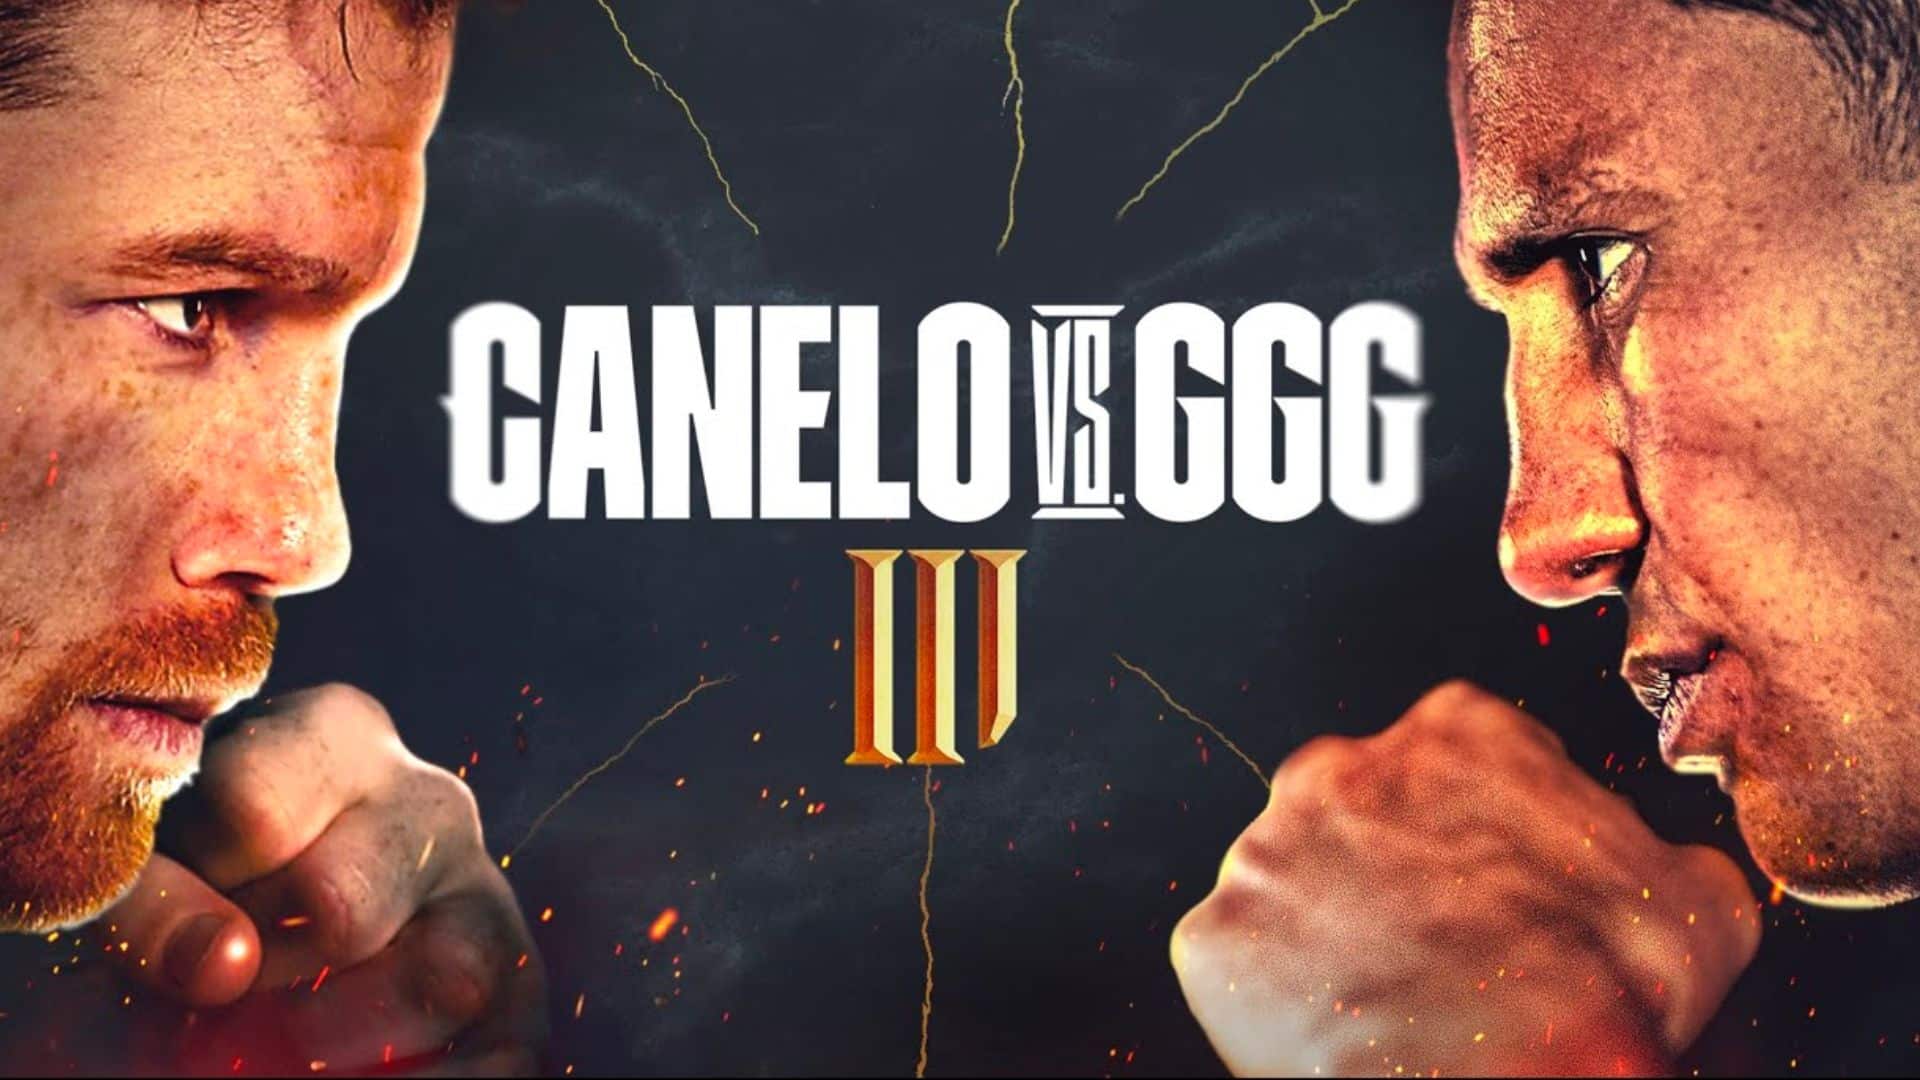 How to watch Canelo vs GGG 3 Where to stream, fight date, more